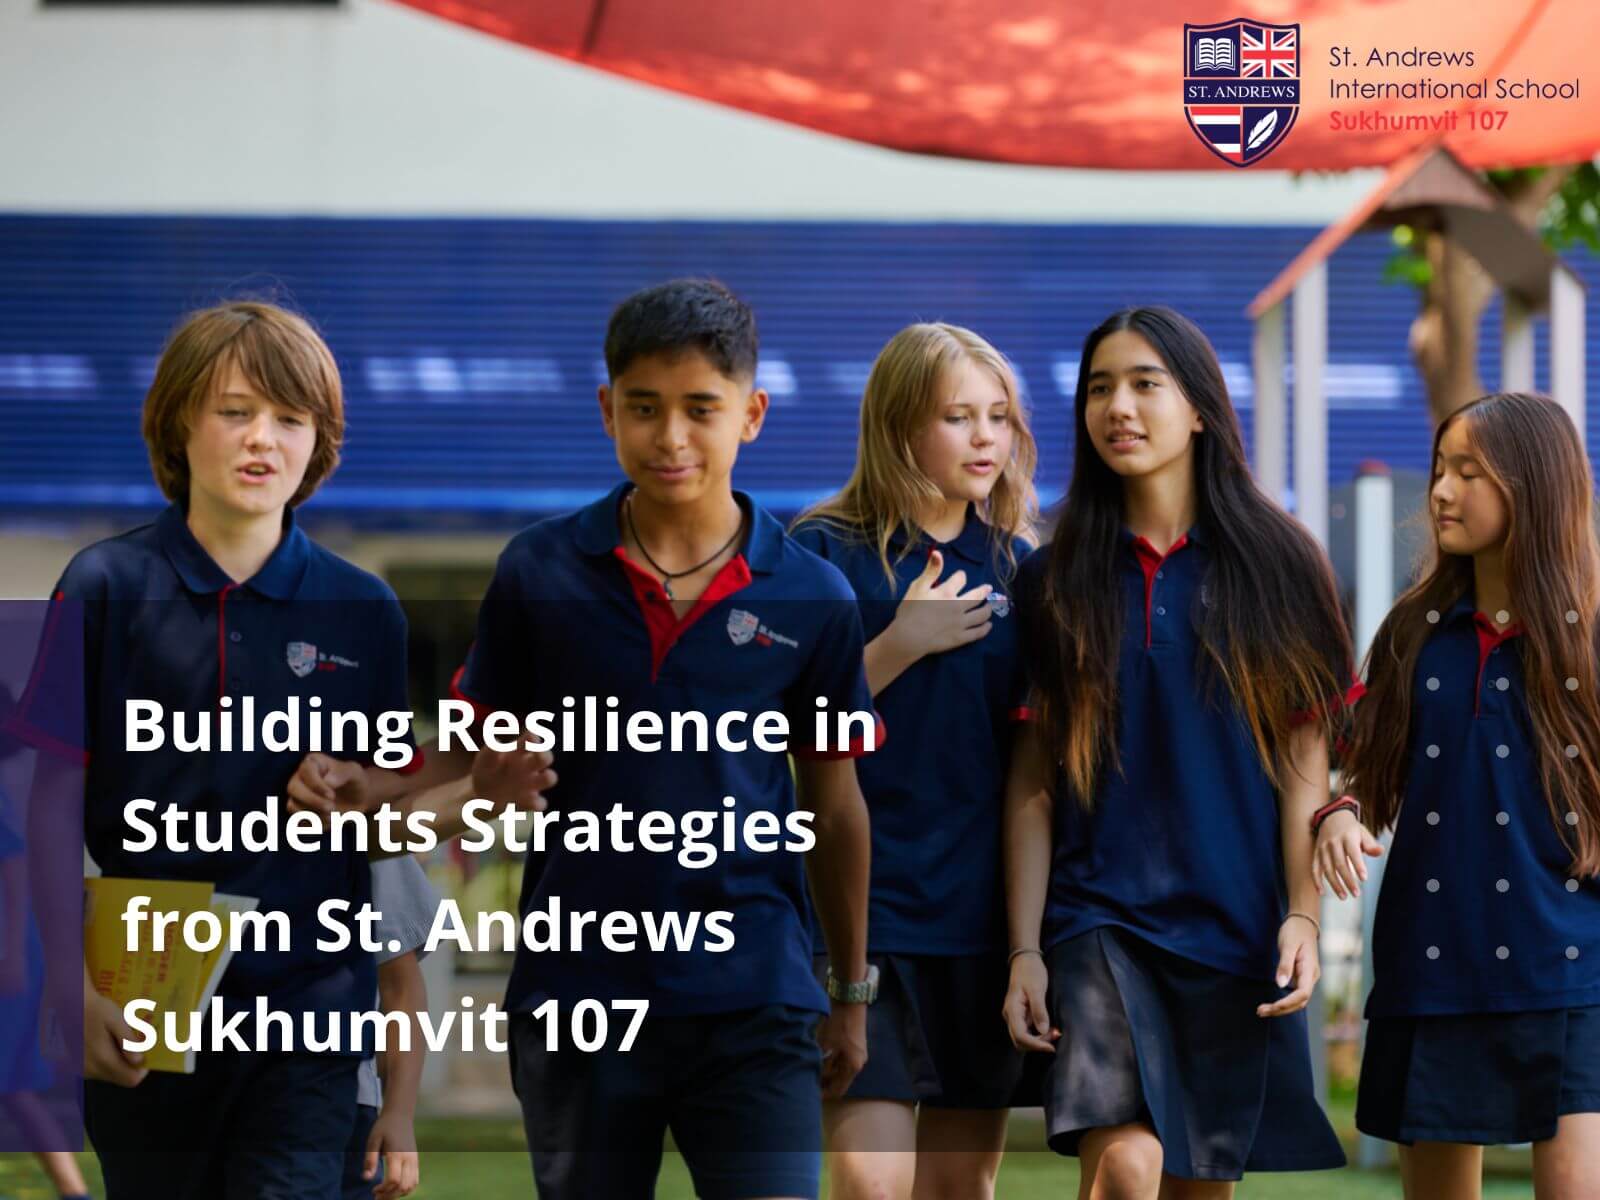 Building Resilience in Students Strategies from St. Andrews Sukhumvit 107